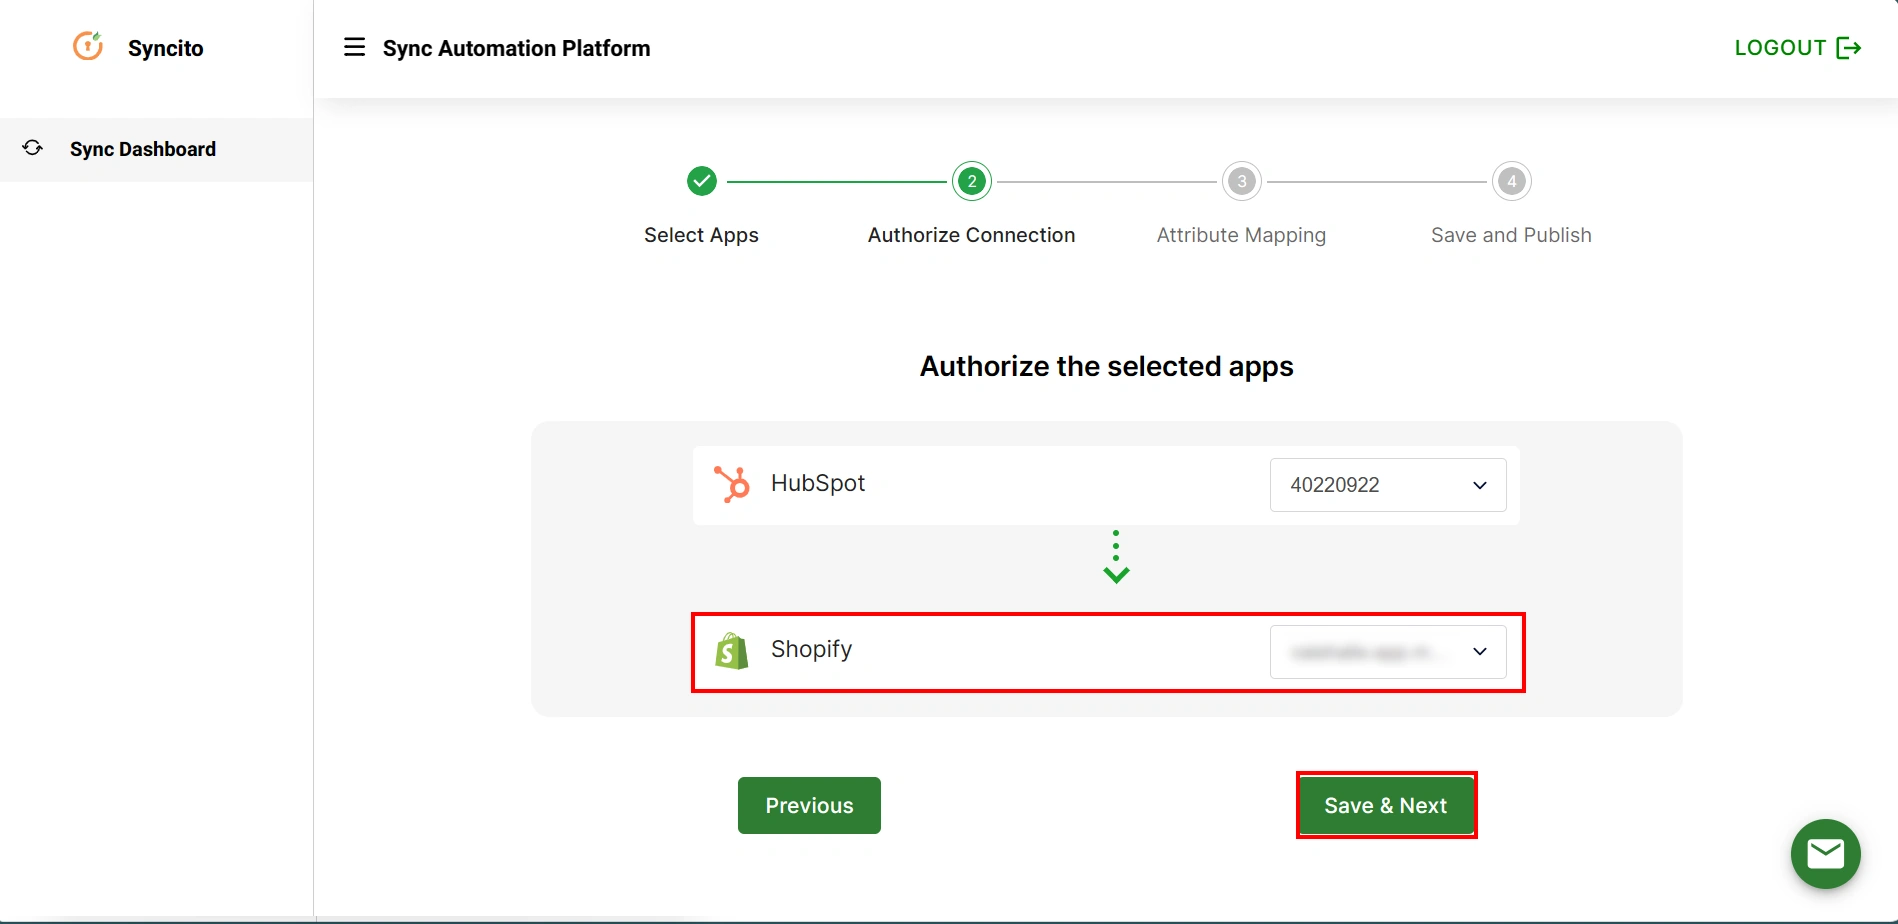 Sync Customer details and Contacts between Shopify and HubSpot